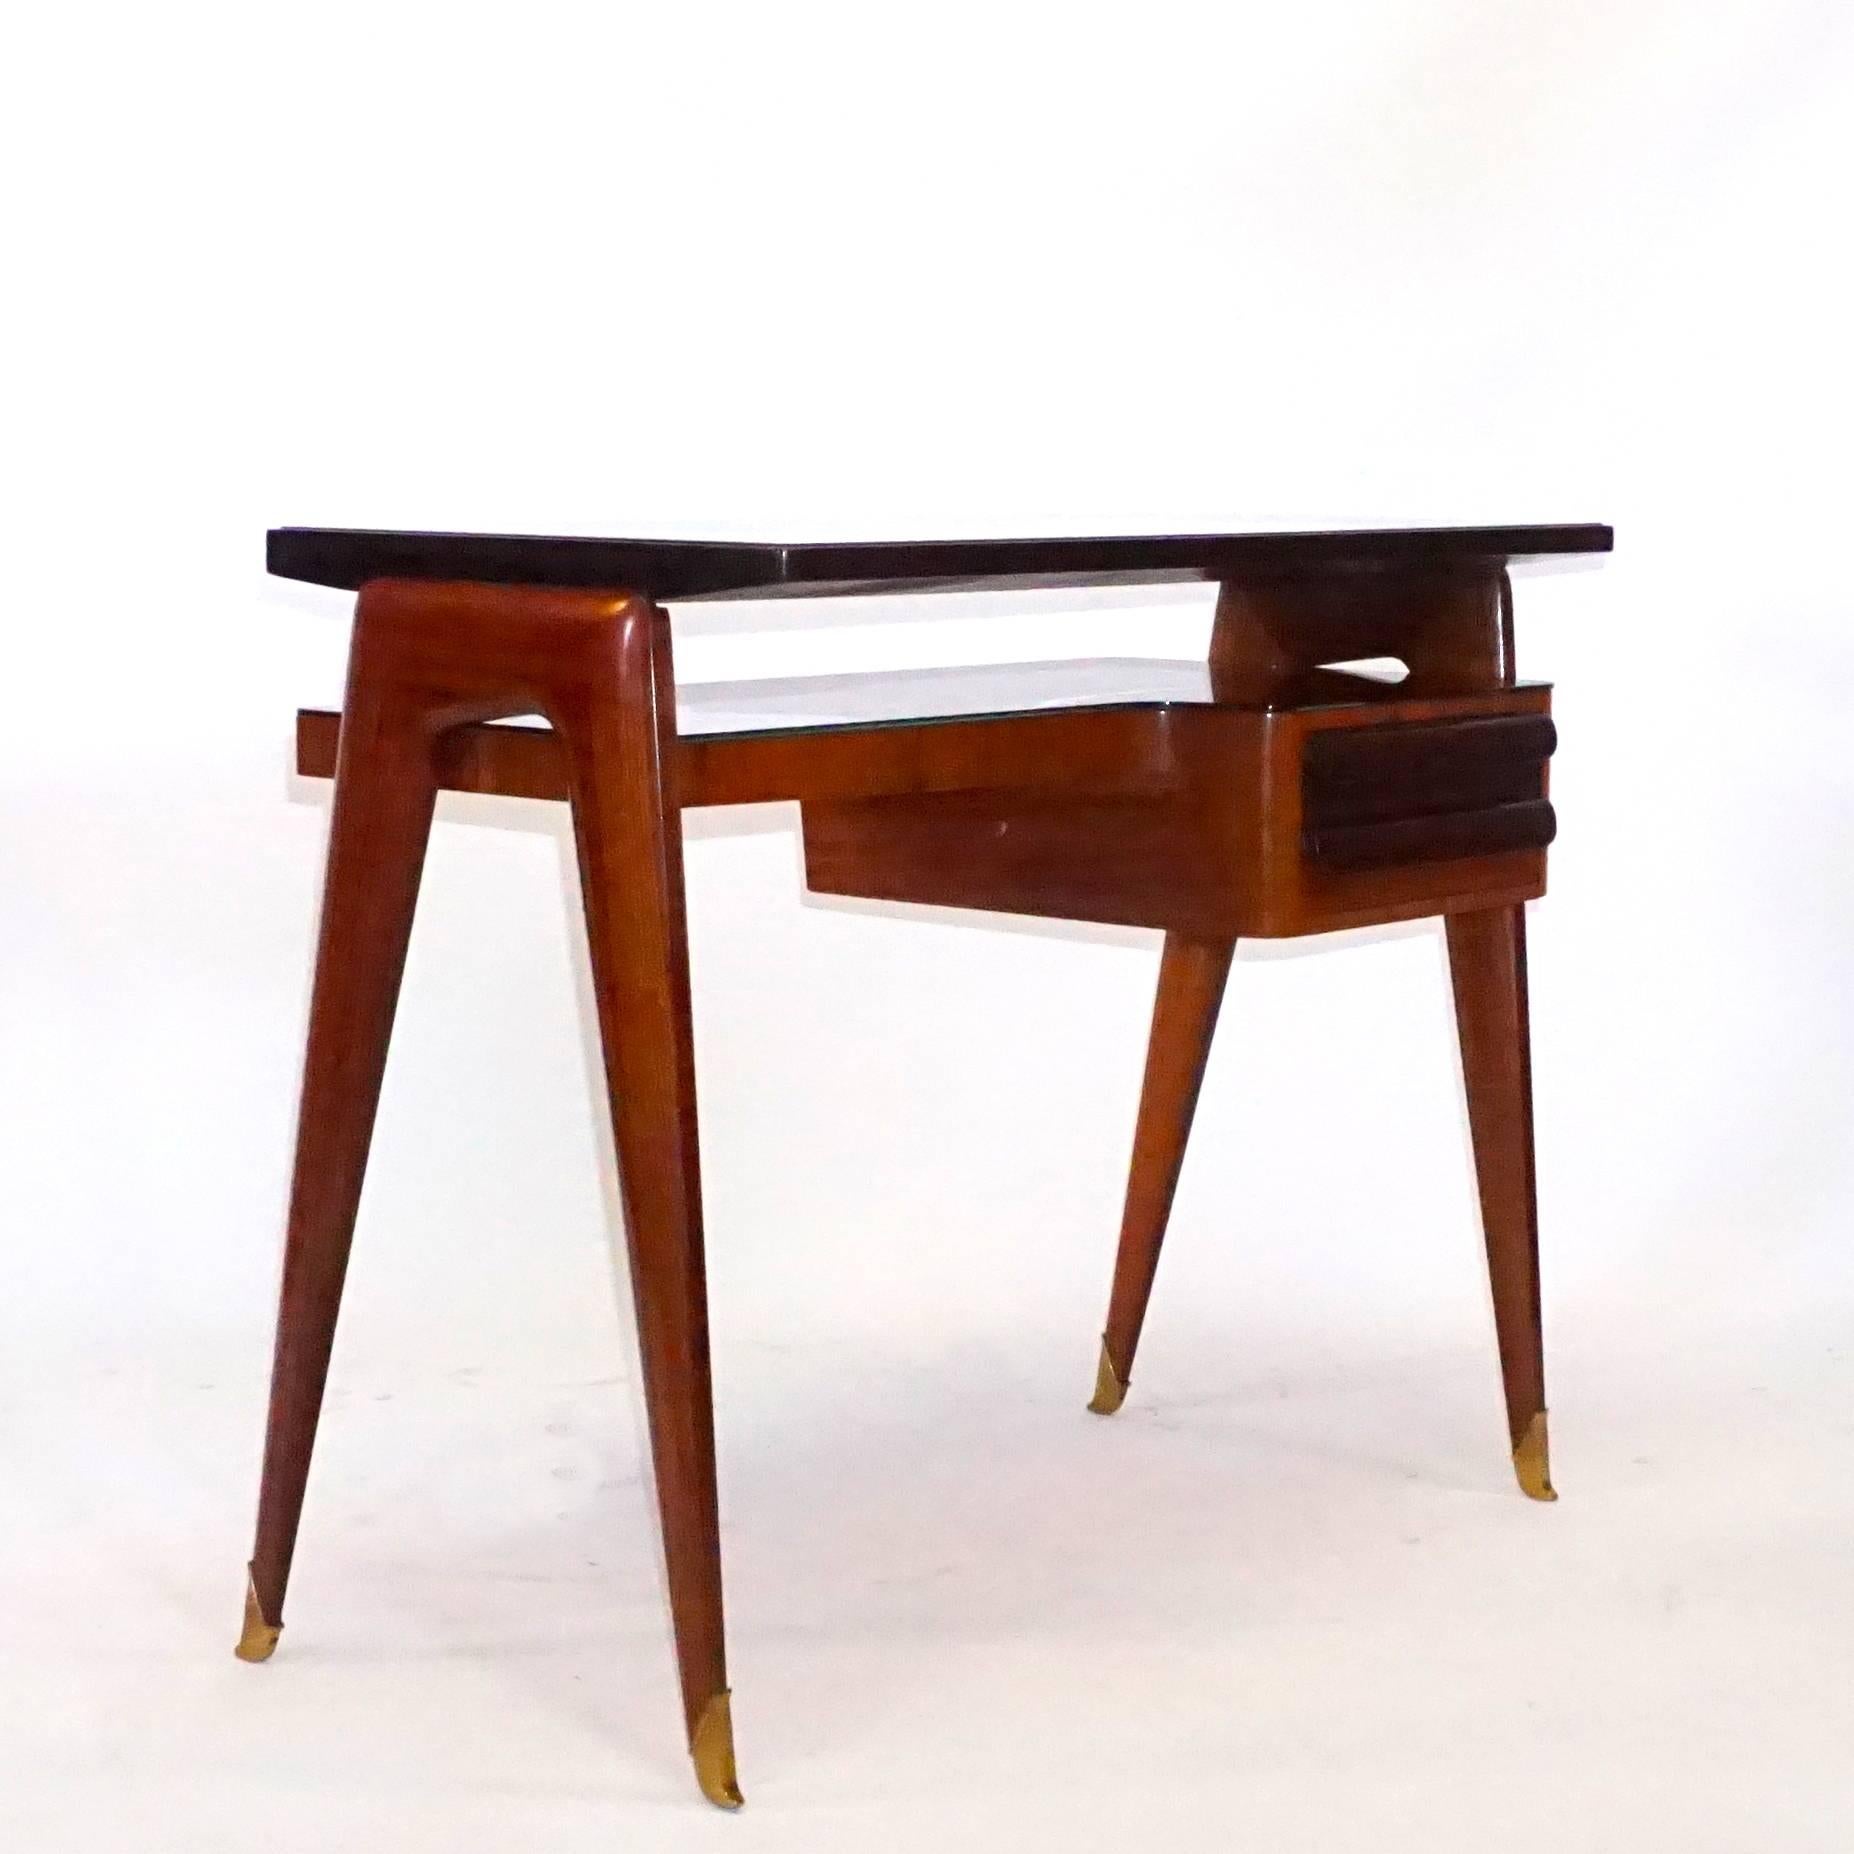 An Italian Vittorio Dassi elegant lady’s writing desk made of Rosewood with patinated brass sabots with two drawers in shellac polish, very good condition. Wear consistent with age and use. Circa 1940 – 1950, Italy.

Vittorio Dassi was an Italian